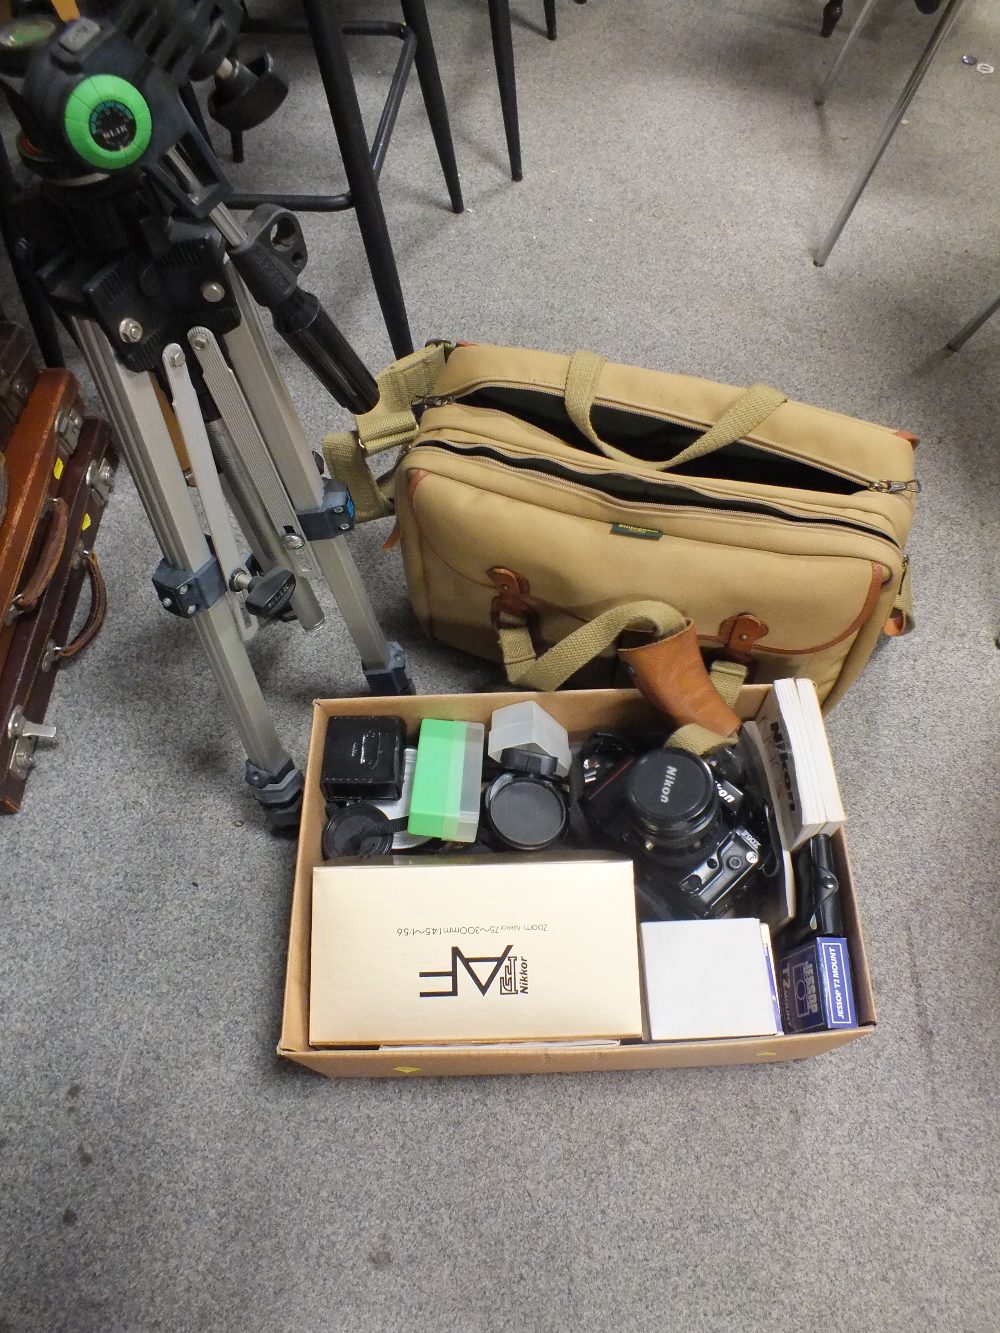 A NIKON F90X CAMERA AND ACCESSORIES TO INCLUDE LENSES, TRIPOD AND BILLINGHAM CARRY BAG ETC